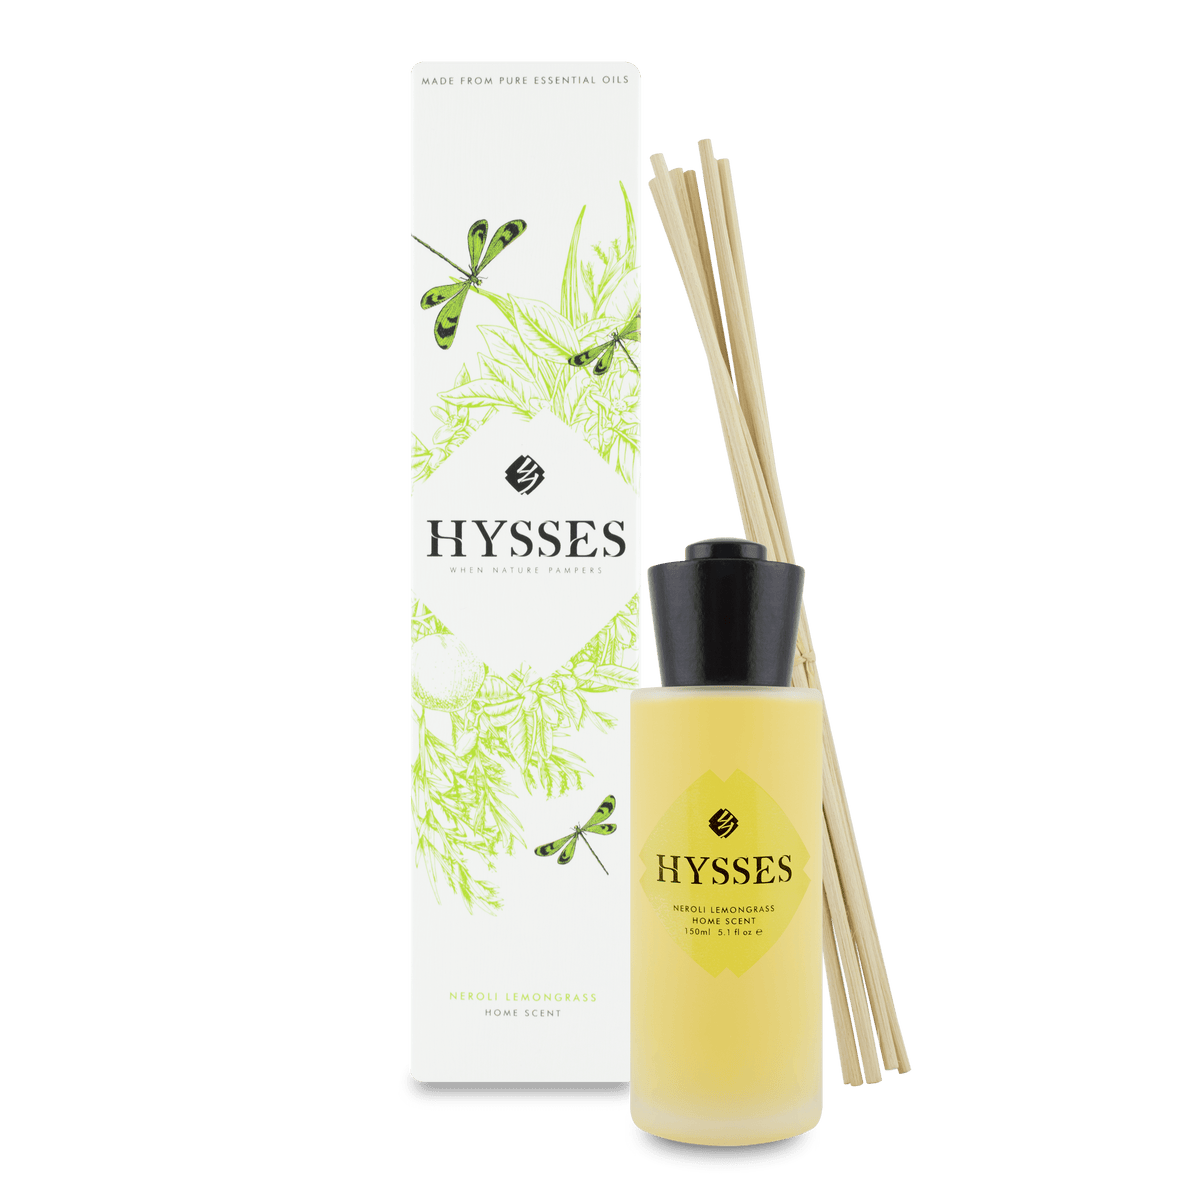 Hysses Home Scents 150ml Home Scent Reed Diffuser Neroli Lemongrass